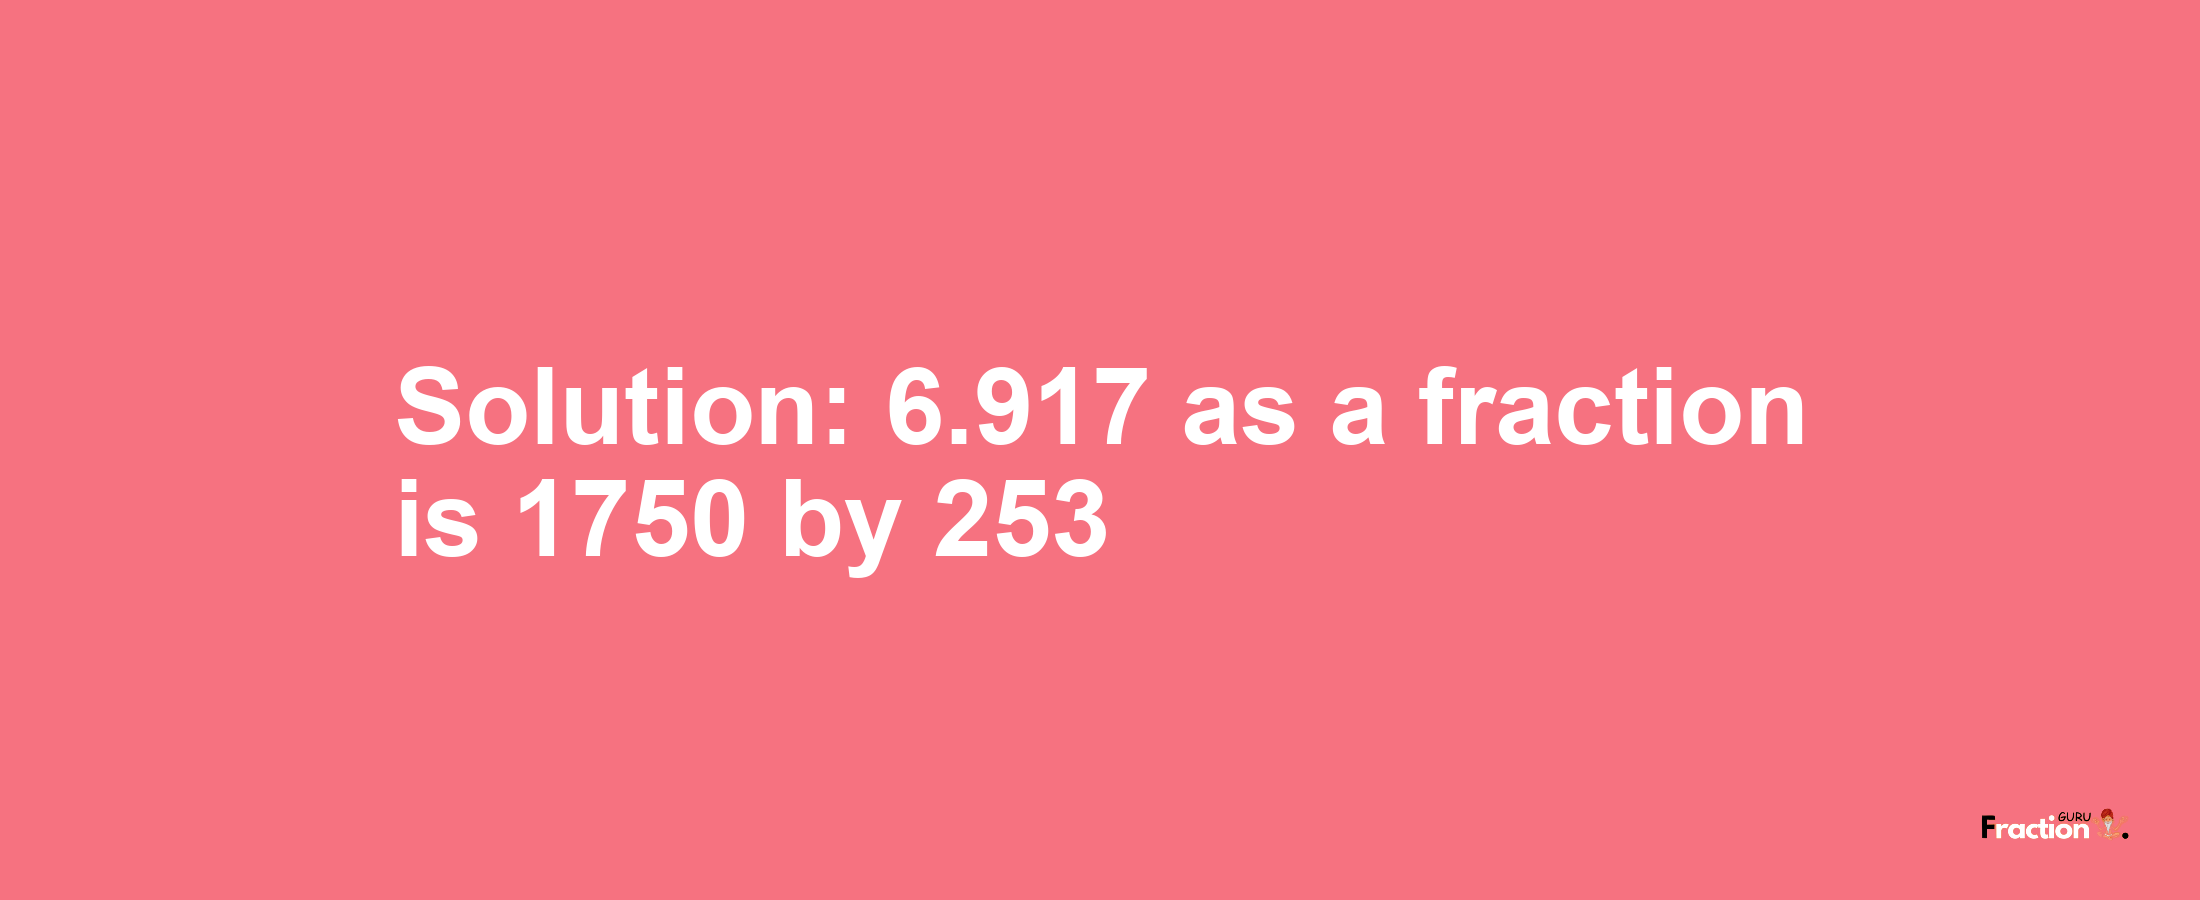 Solution:6.917 as a fraction is 1750/253